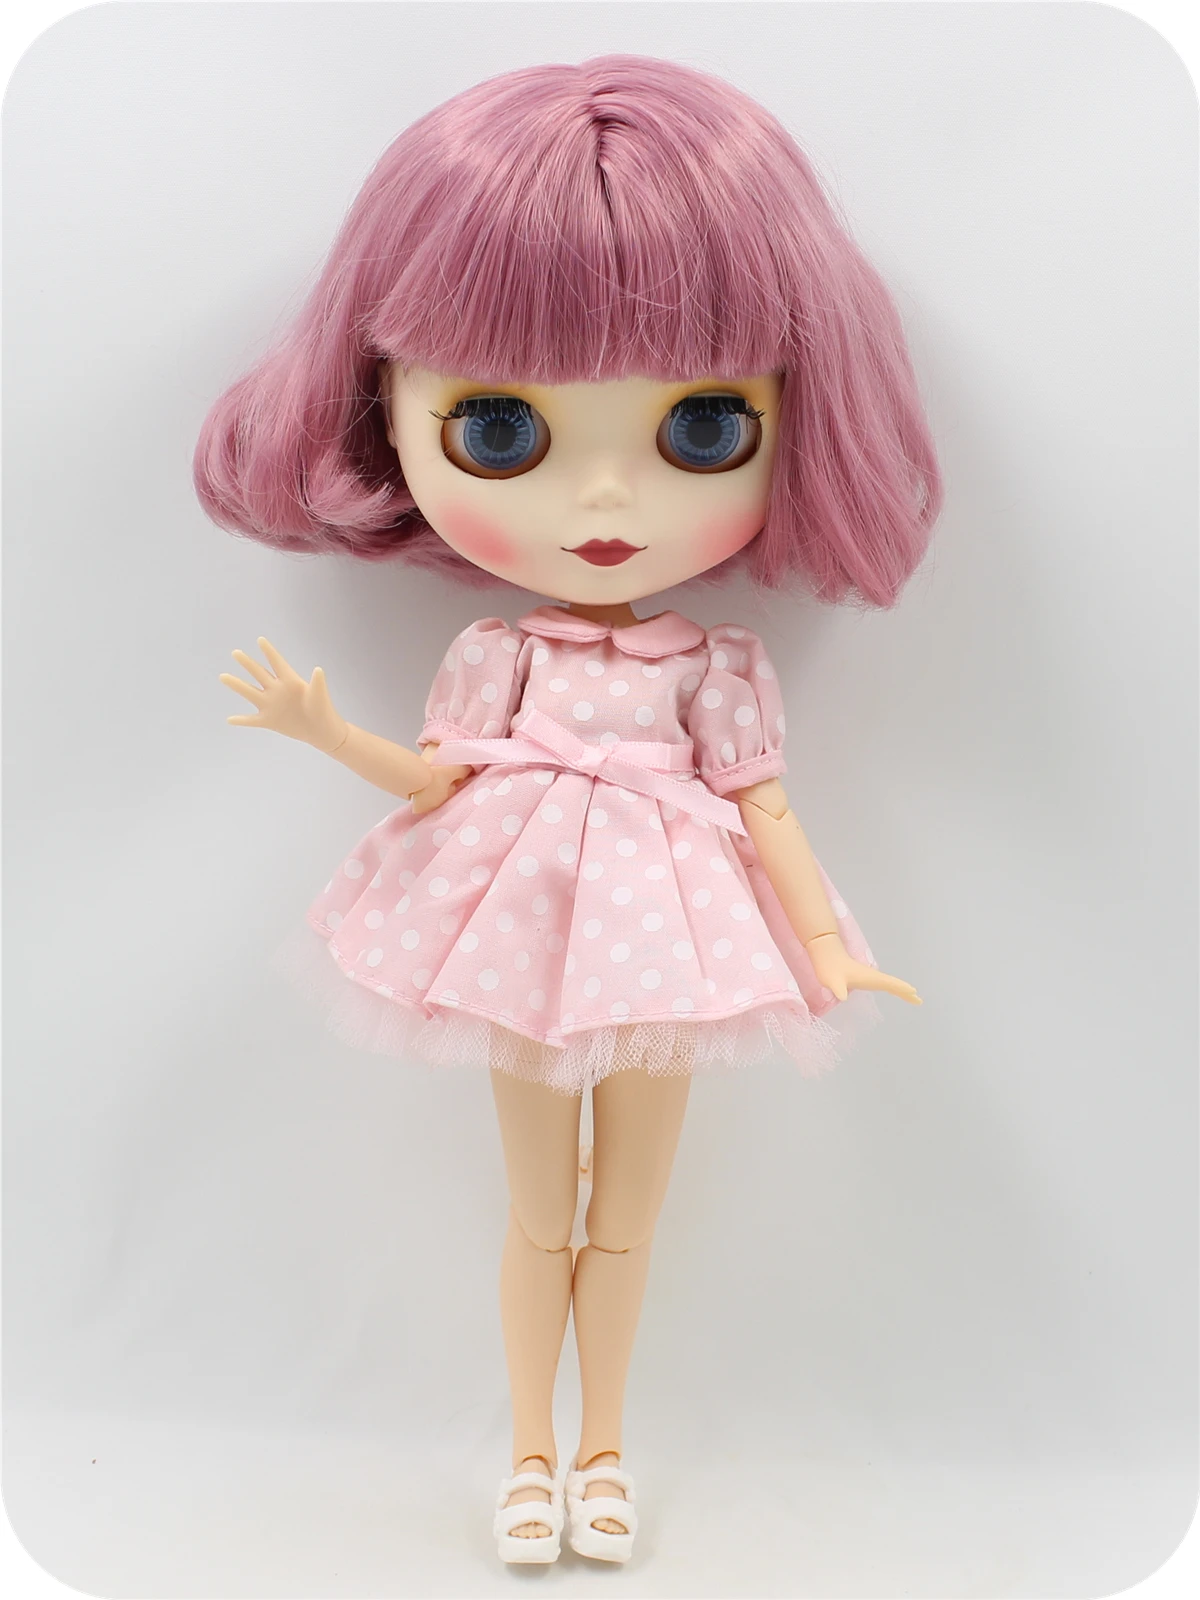 Neo Blythe Doll with Pink Hair, White Skin, Matte Cute Face & Factory Jointed Body 1